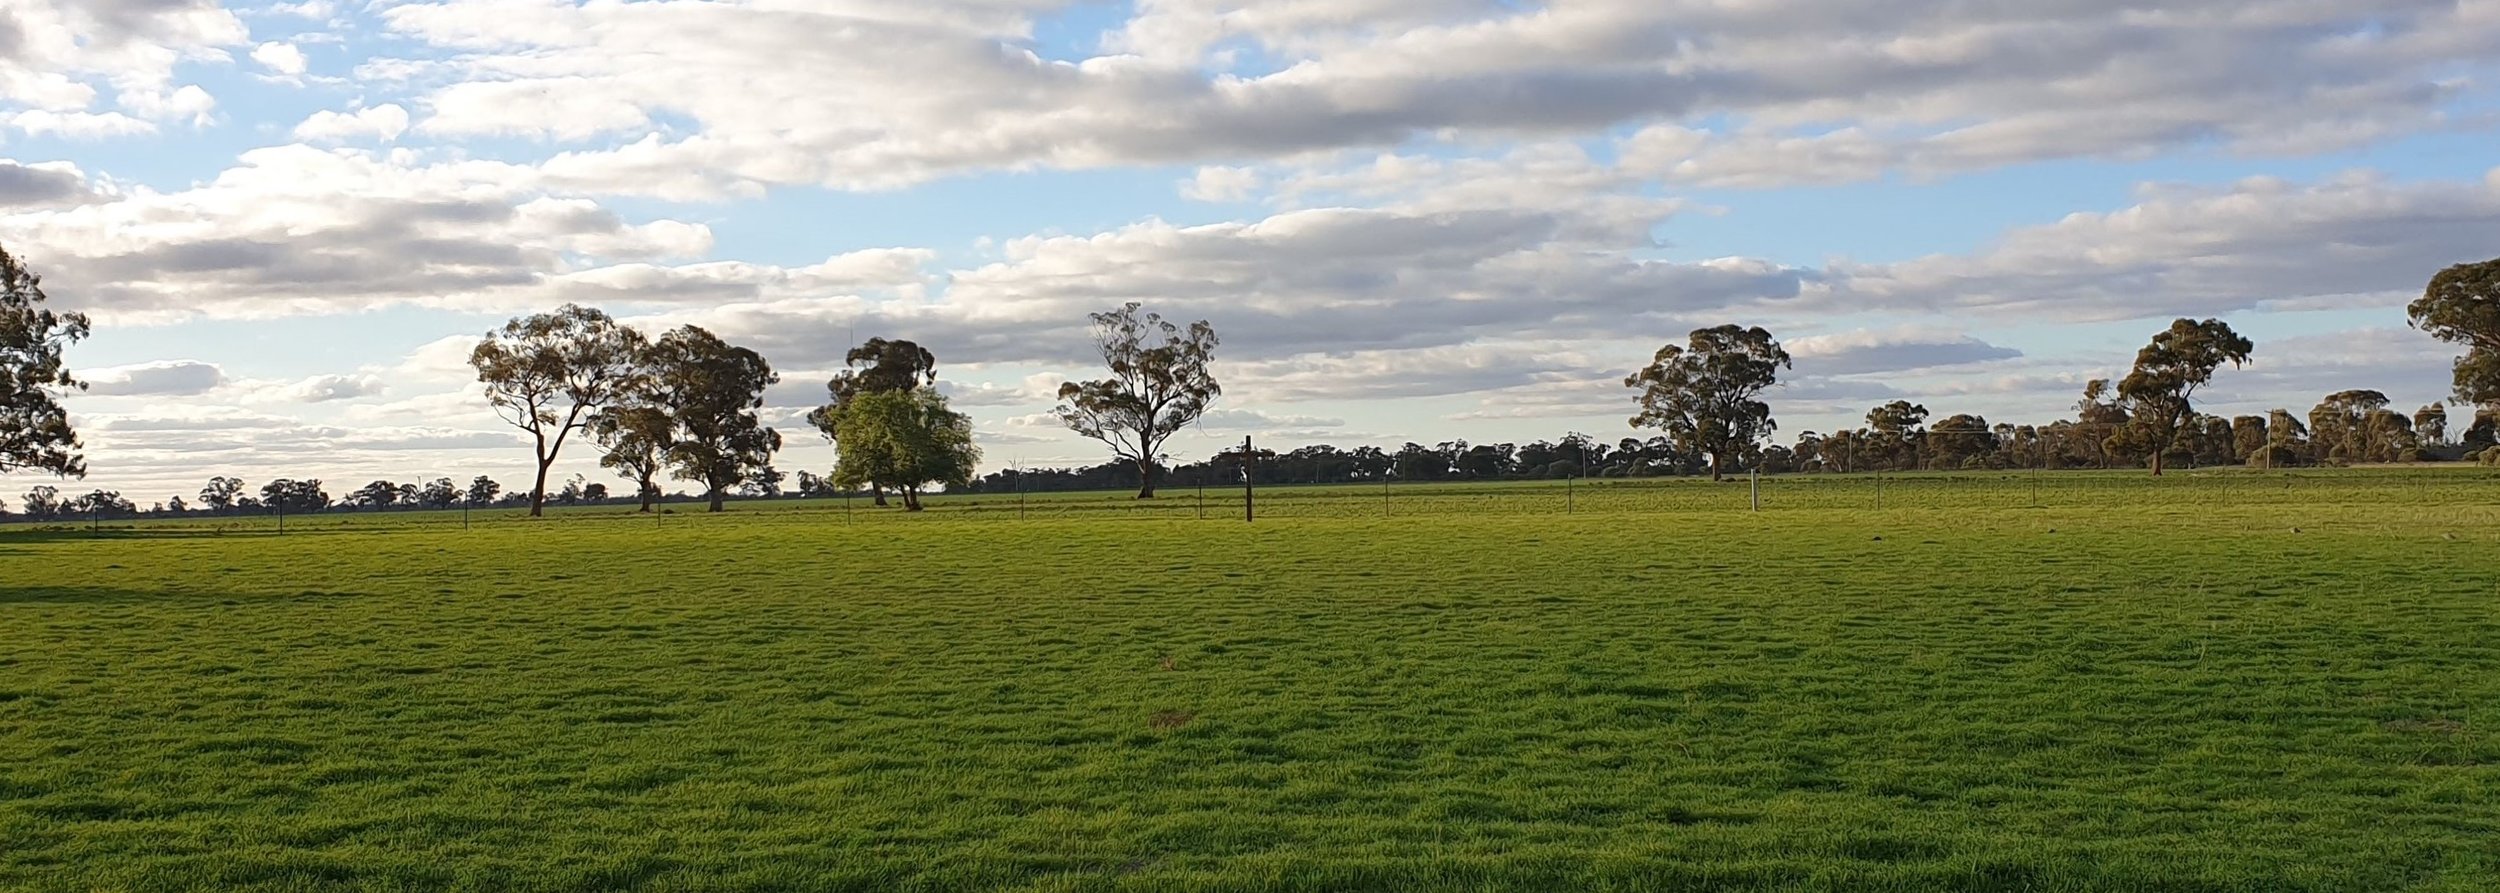  The front paddock, with large Cross.   June 2019  